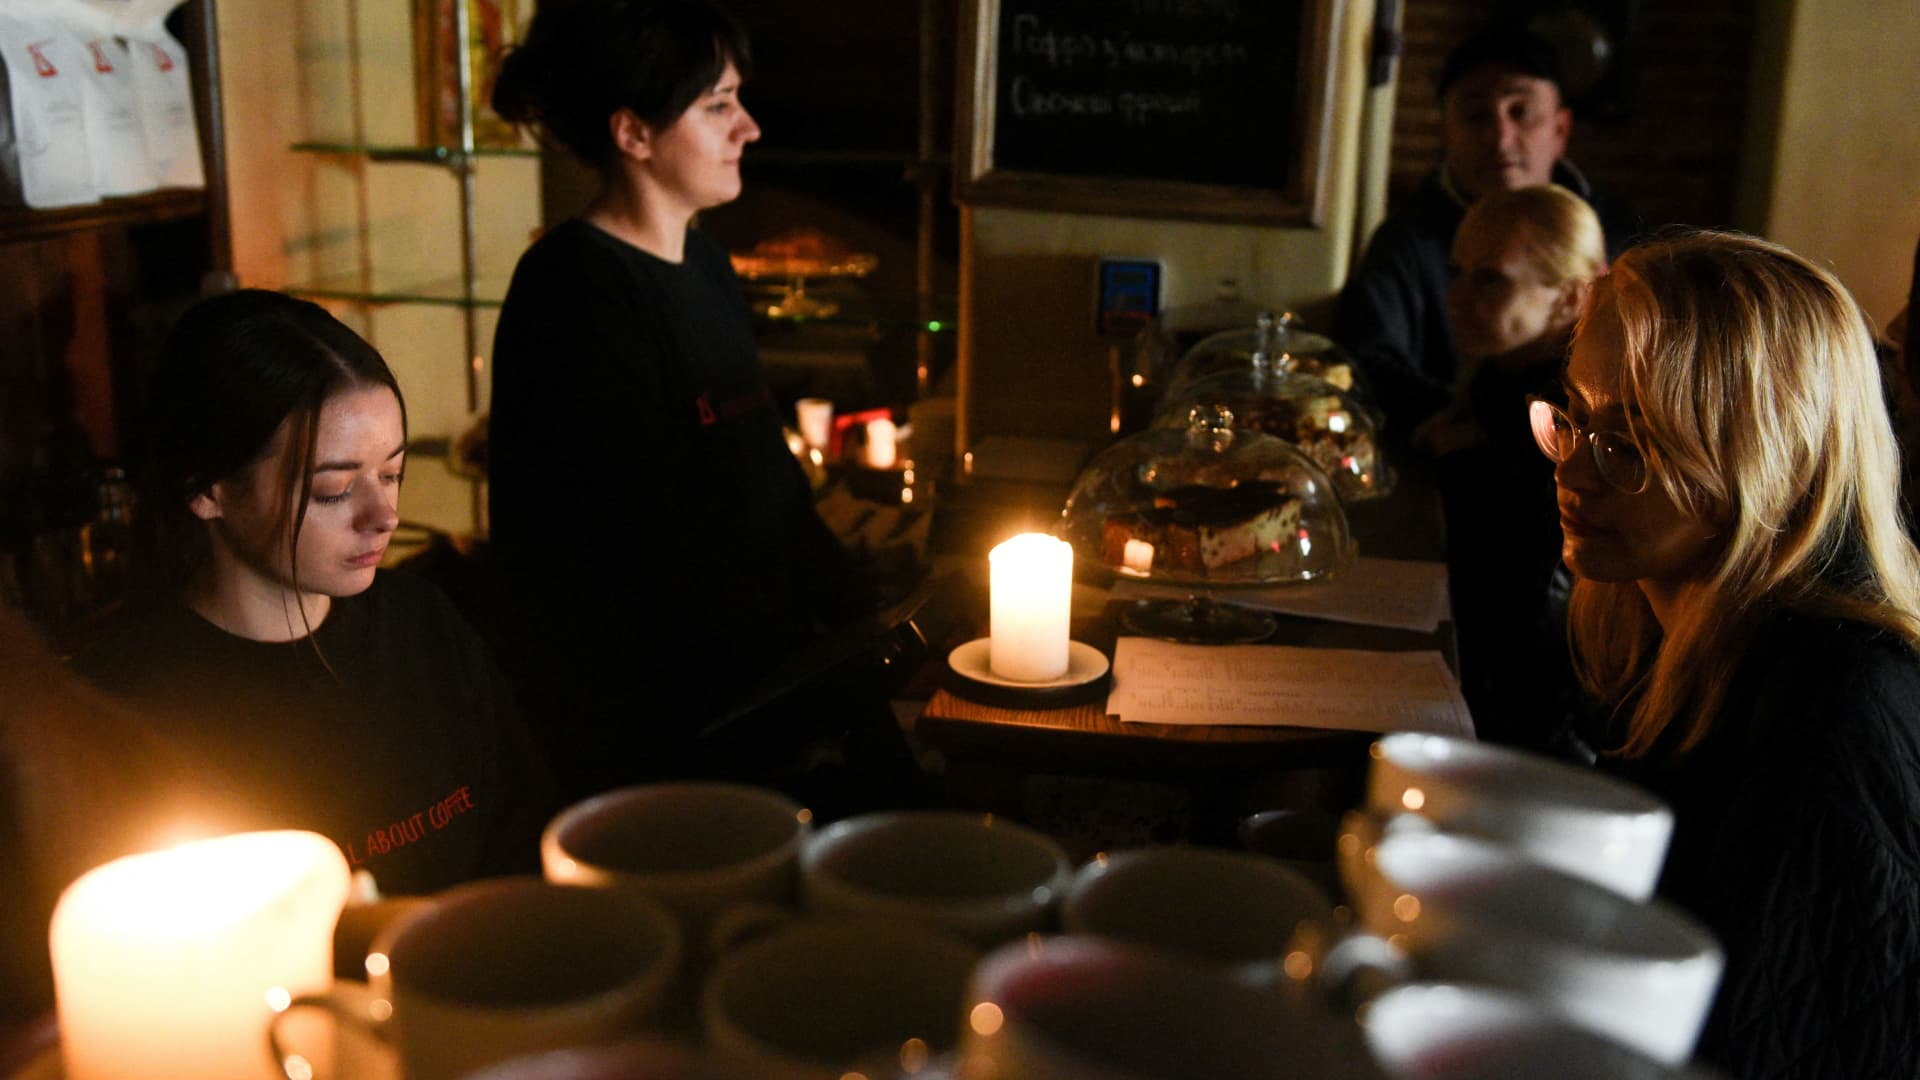 A cafe without electricity in western Ukrainian city of Lviv, after three Russian missiles fired targeted energy infrastructure on Oct. 11, 2022. Lviv's mayor said that one-third of homes were without power.